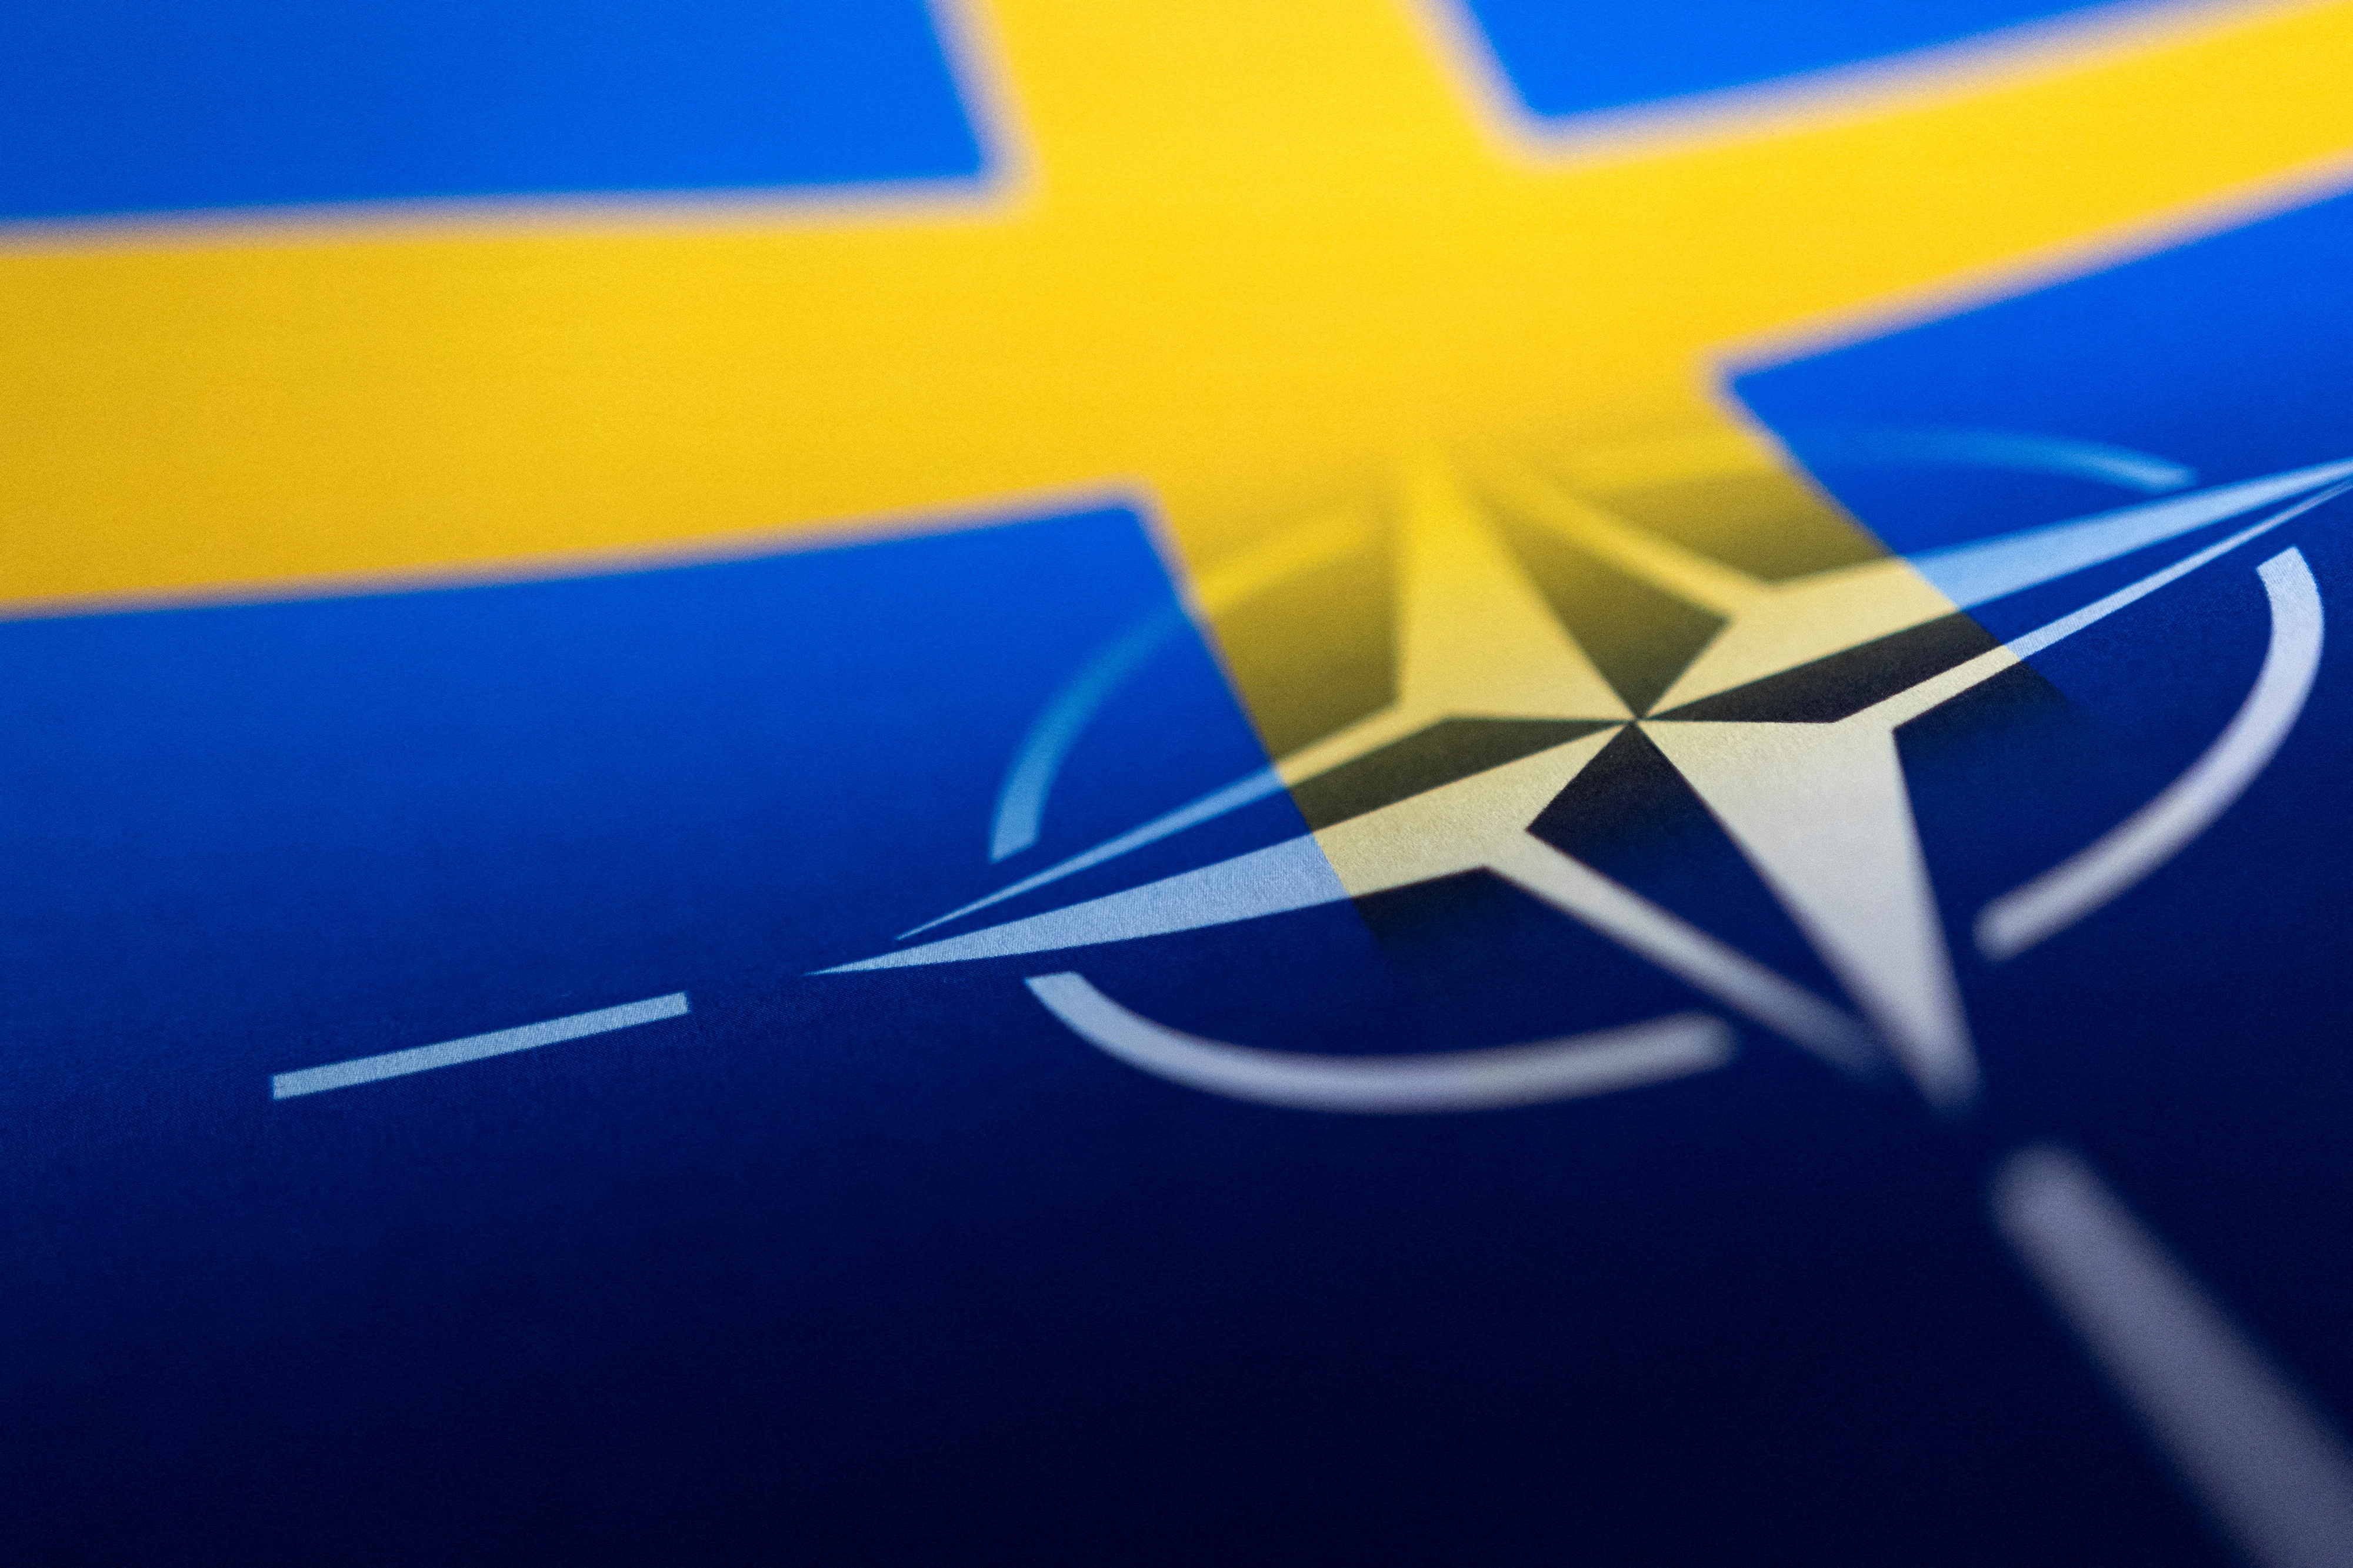 Illustration shows Swedish and NATO flags